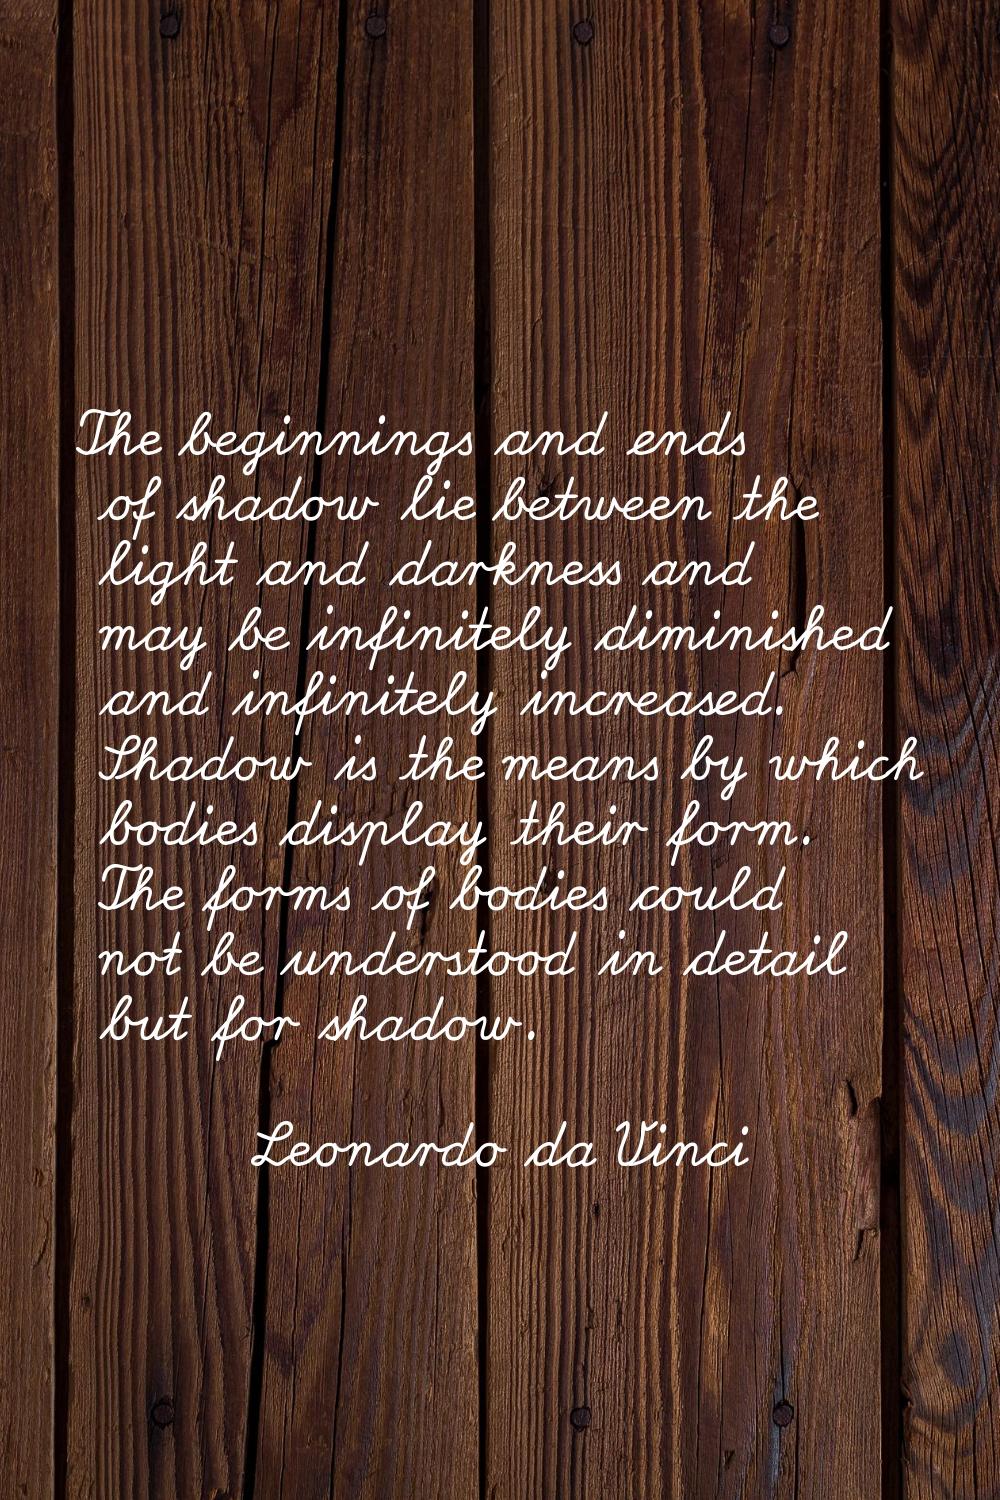 The beginnings and ends of shadow lie between the light and darkness and may be infinitely diminish